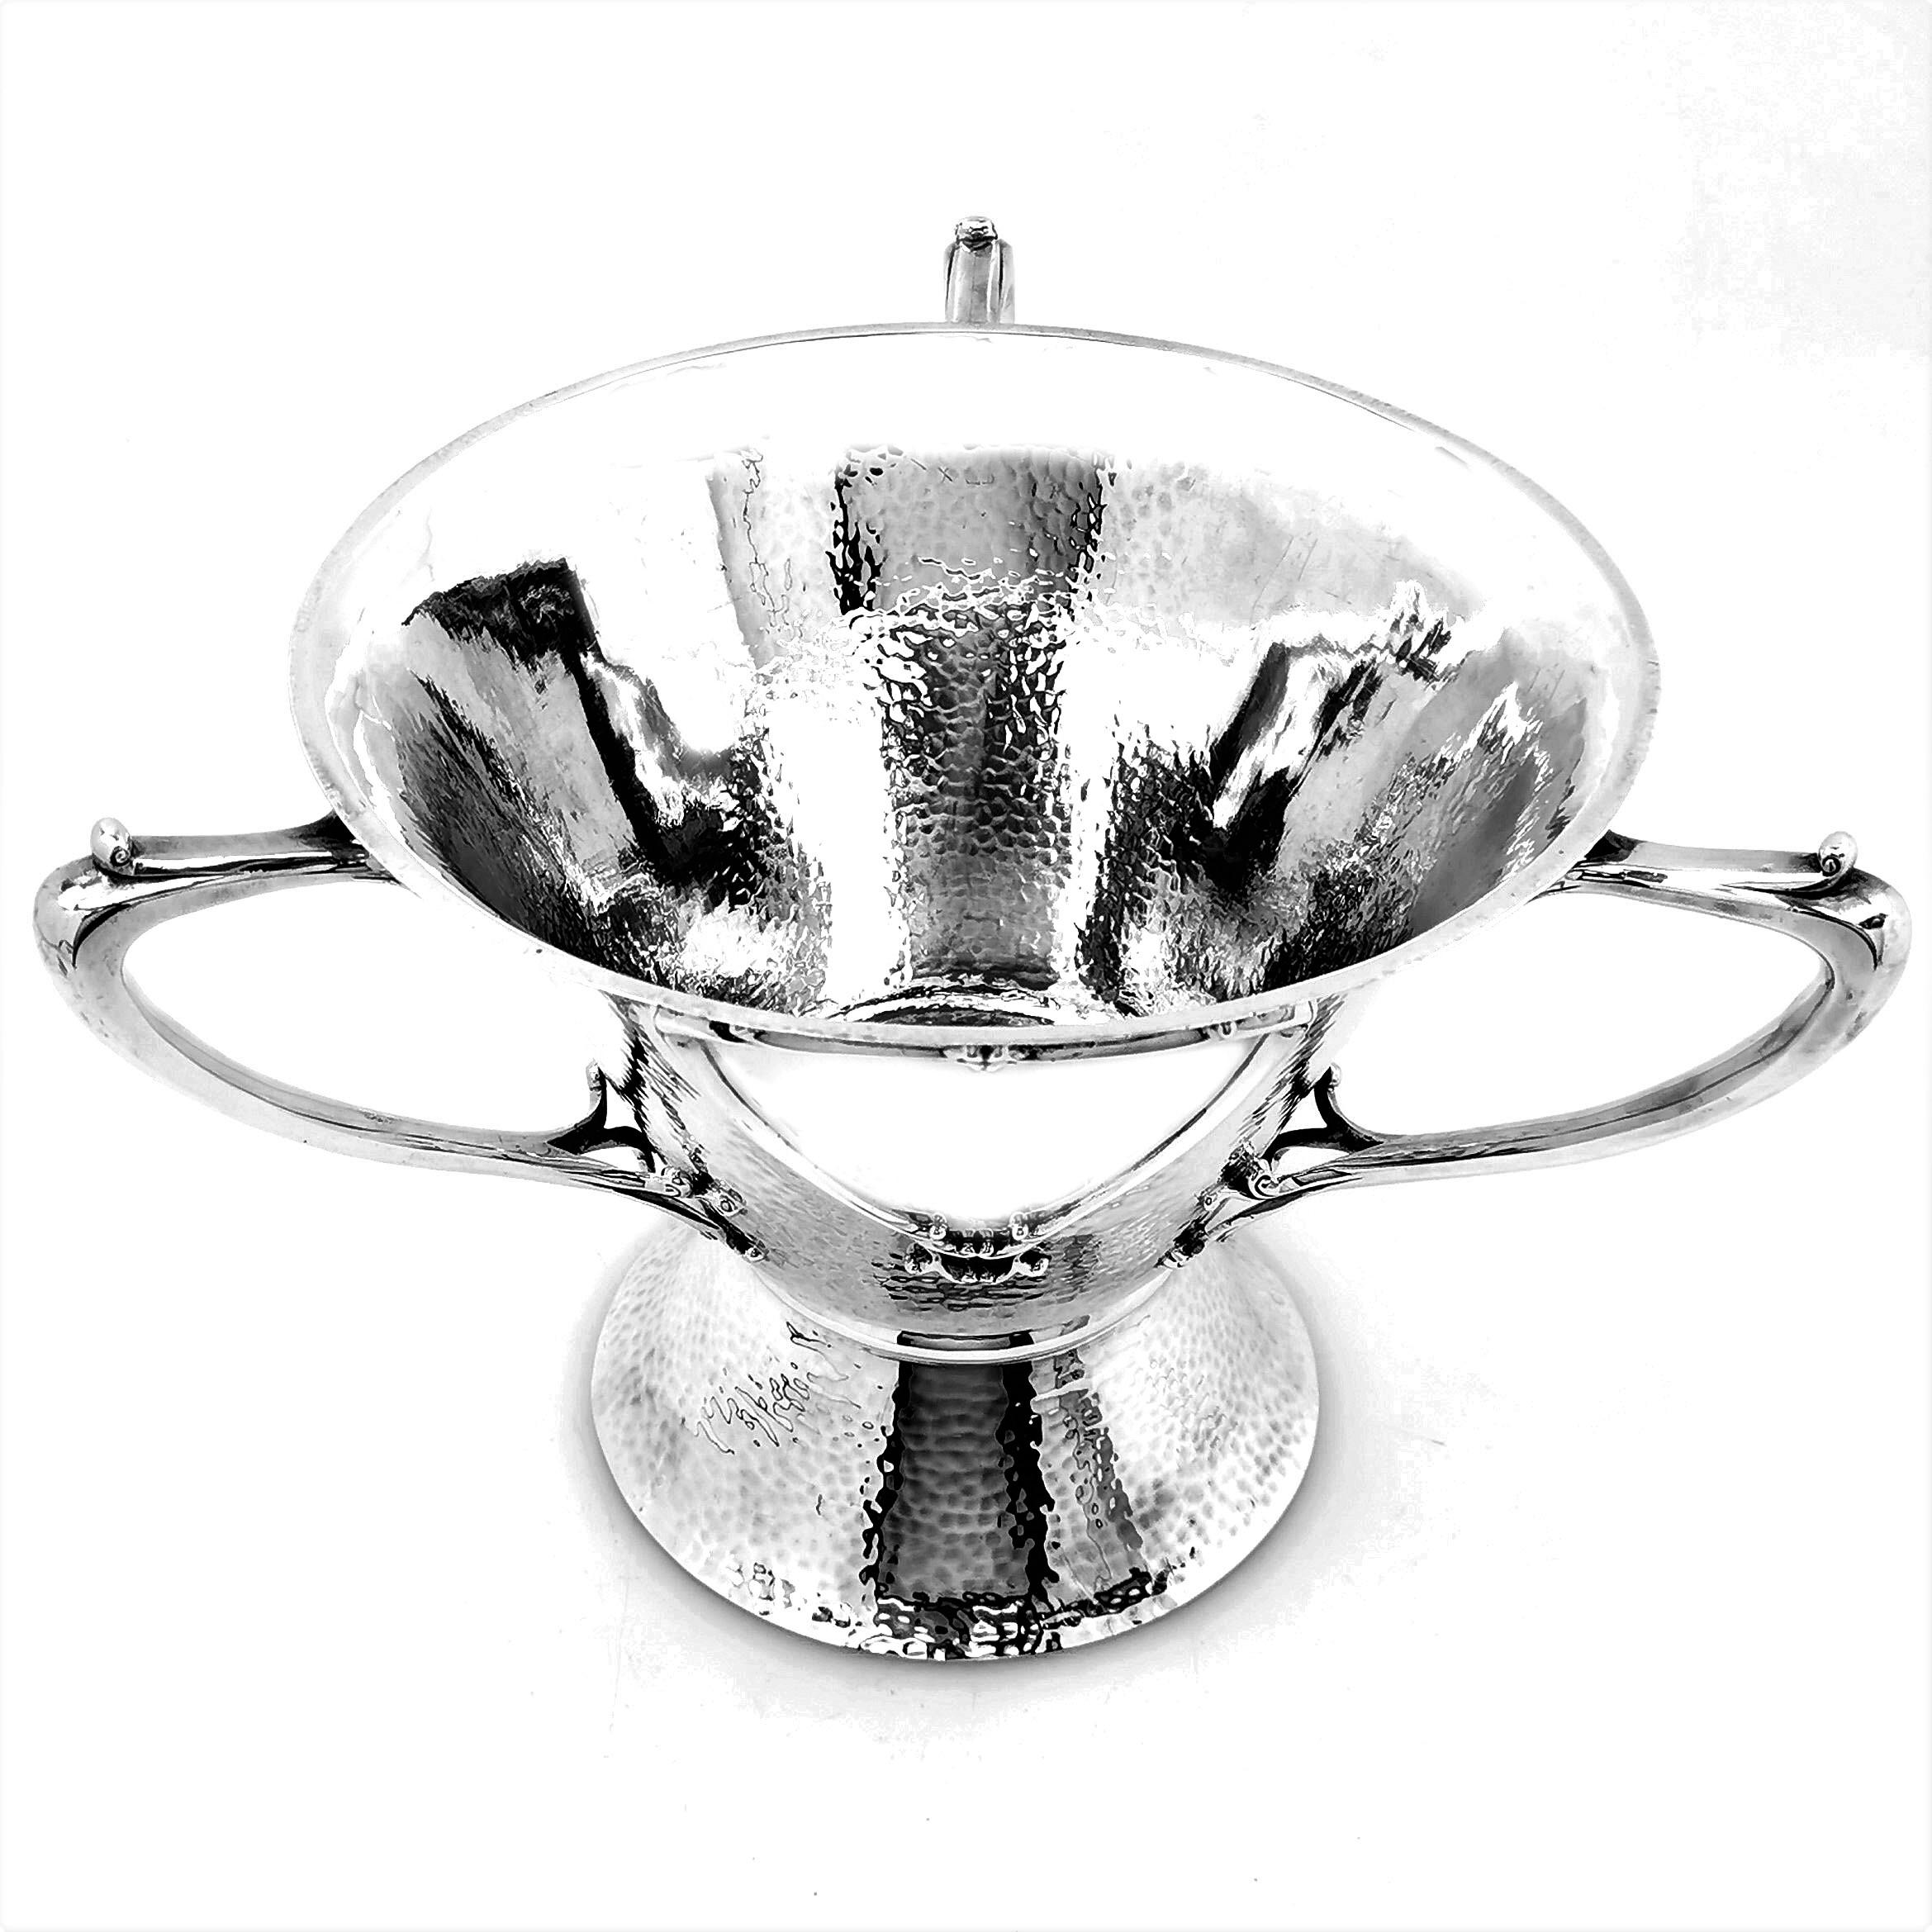 A beautiful Antique Arts & Crafts Scottish Silver three handled Cup in an elegant Arts & Crafts design. The Loving Cup has three elegant handles with shaped polished cartouches between each one. The rest of the body and spread foot have a hammered